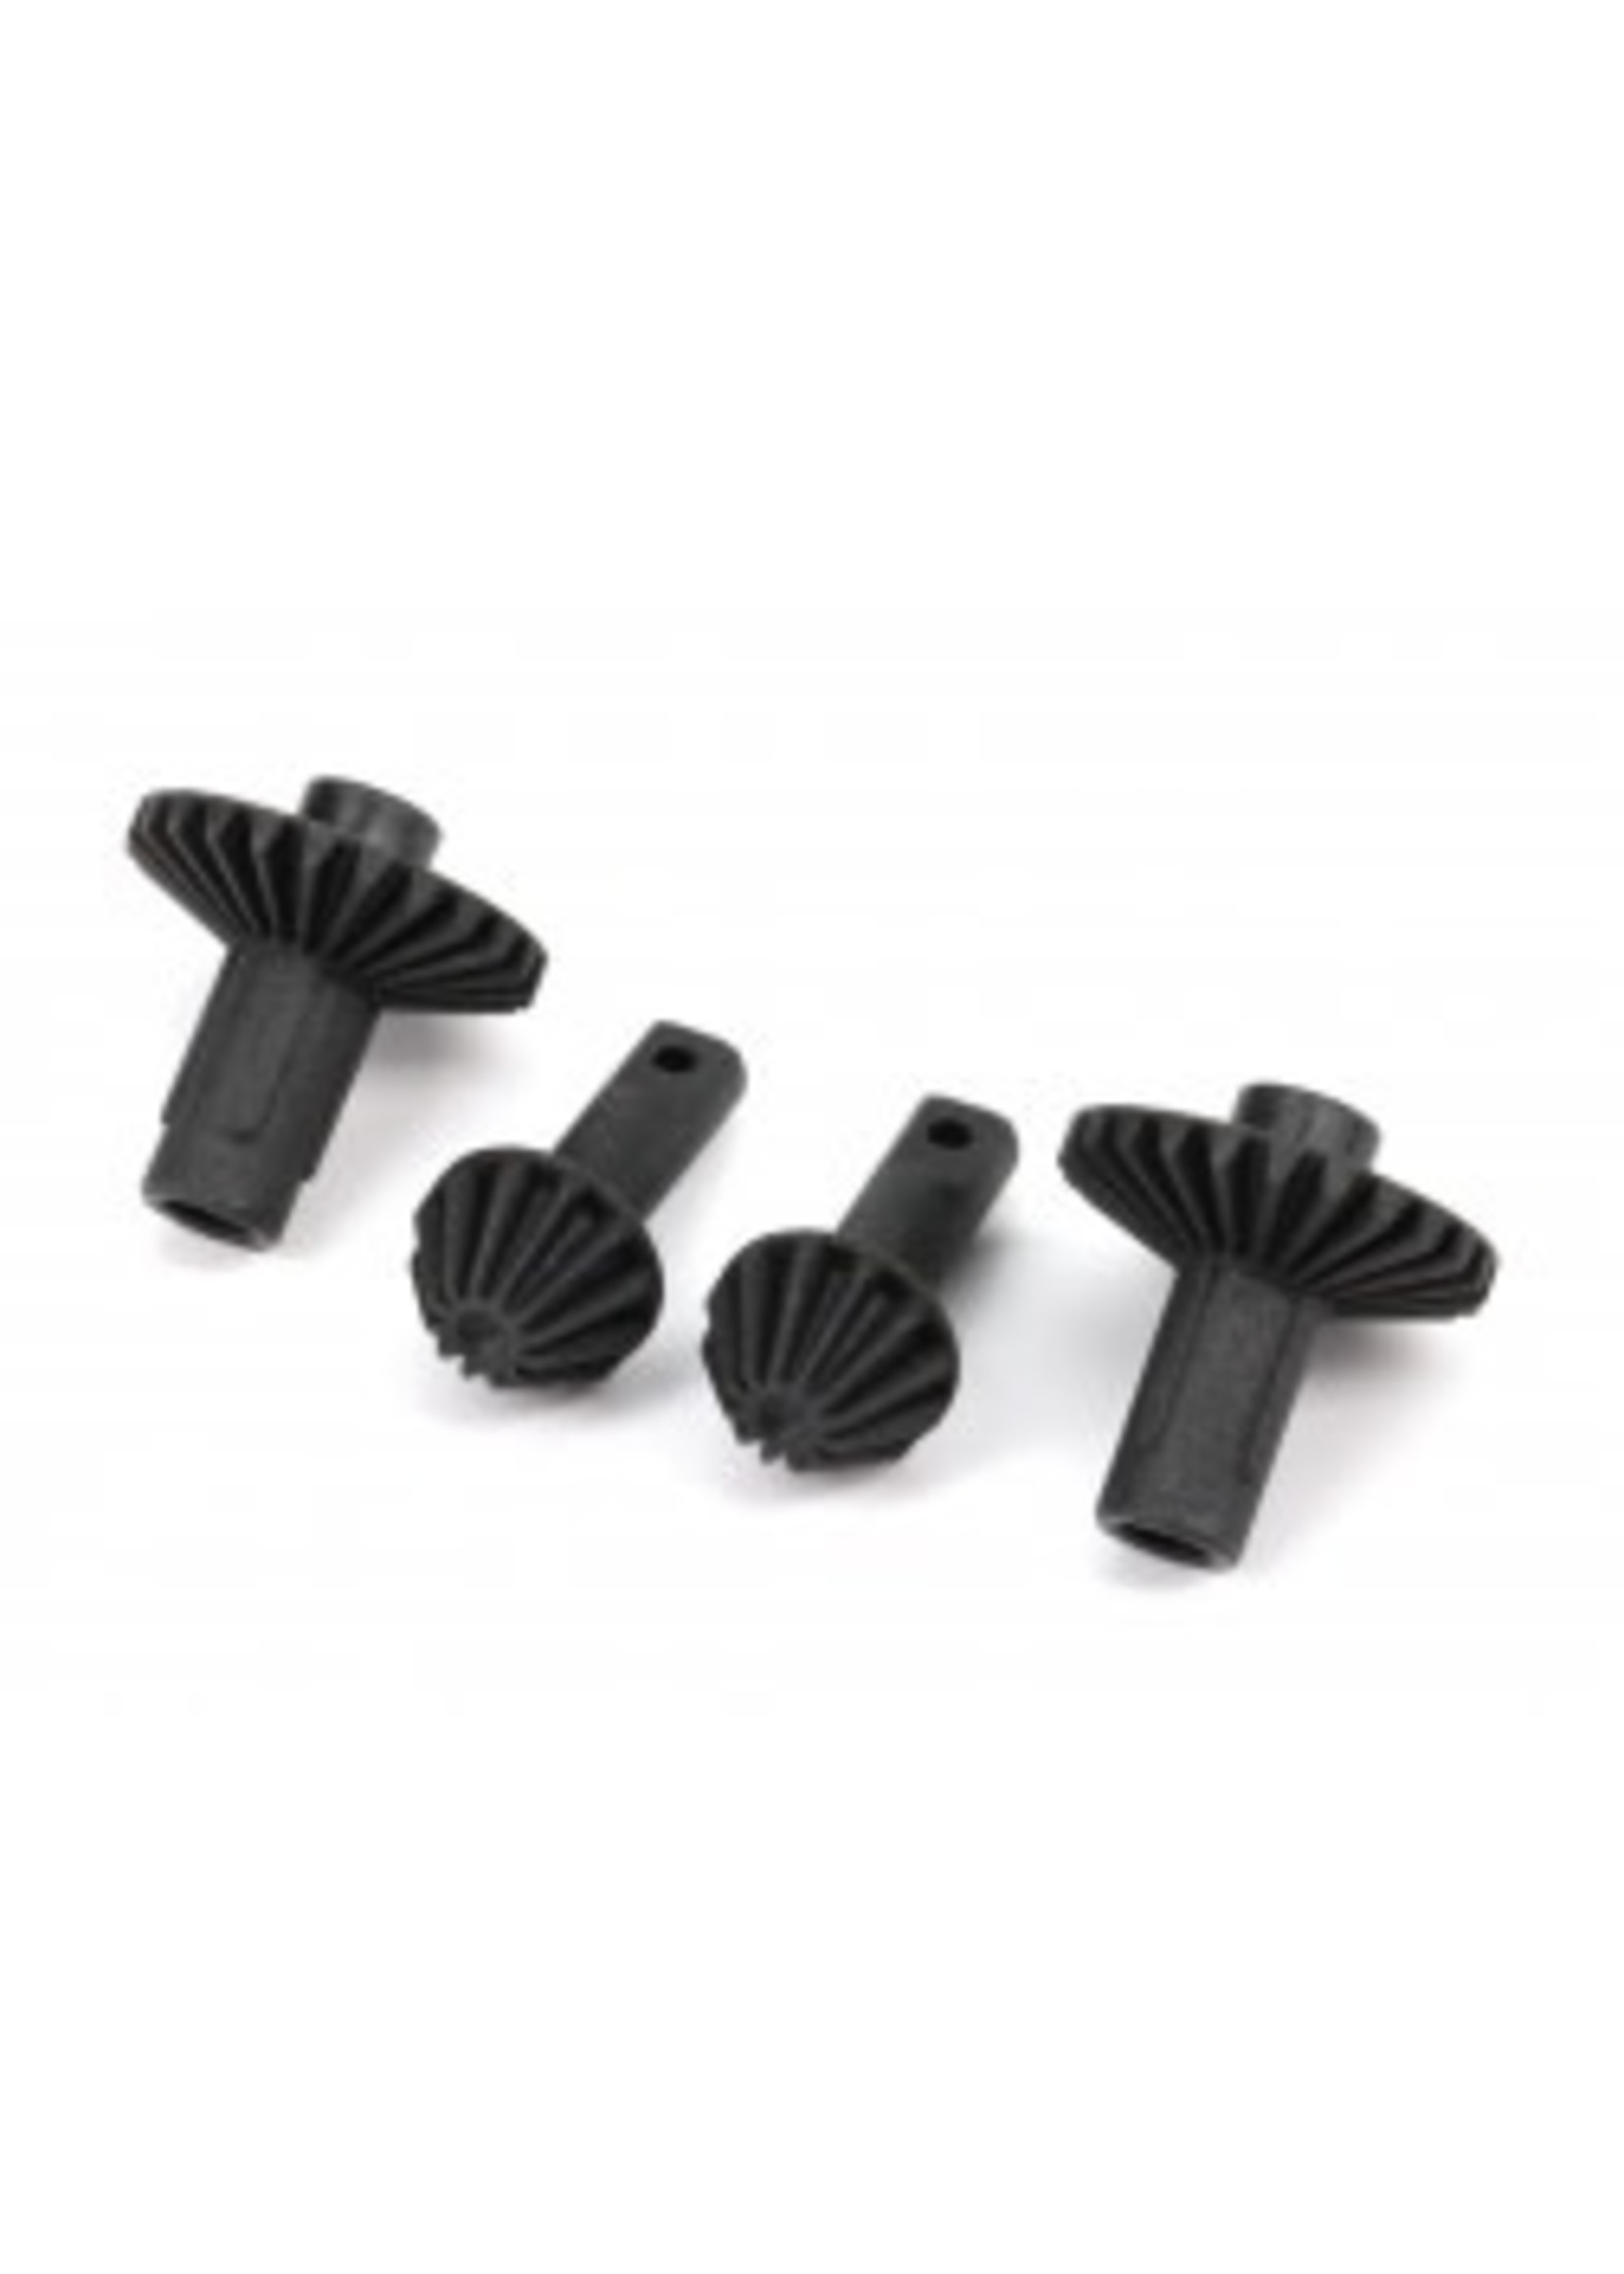 Traxxas 9777 Ring and Pinion Gears (2)